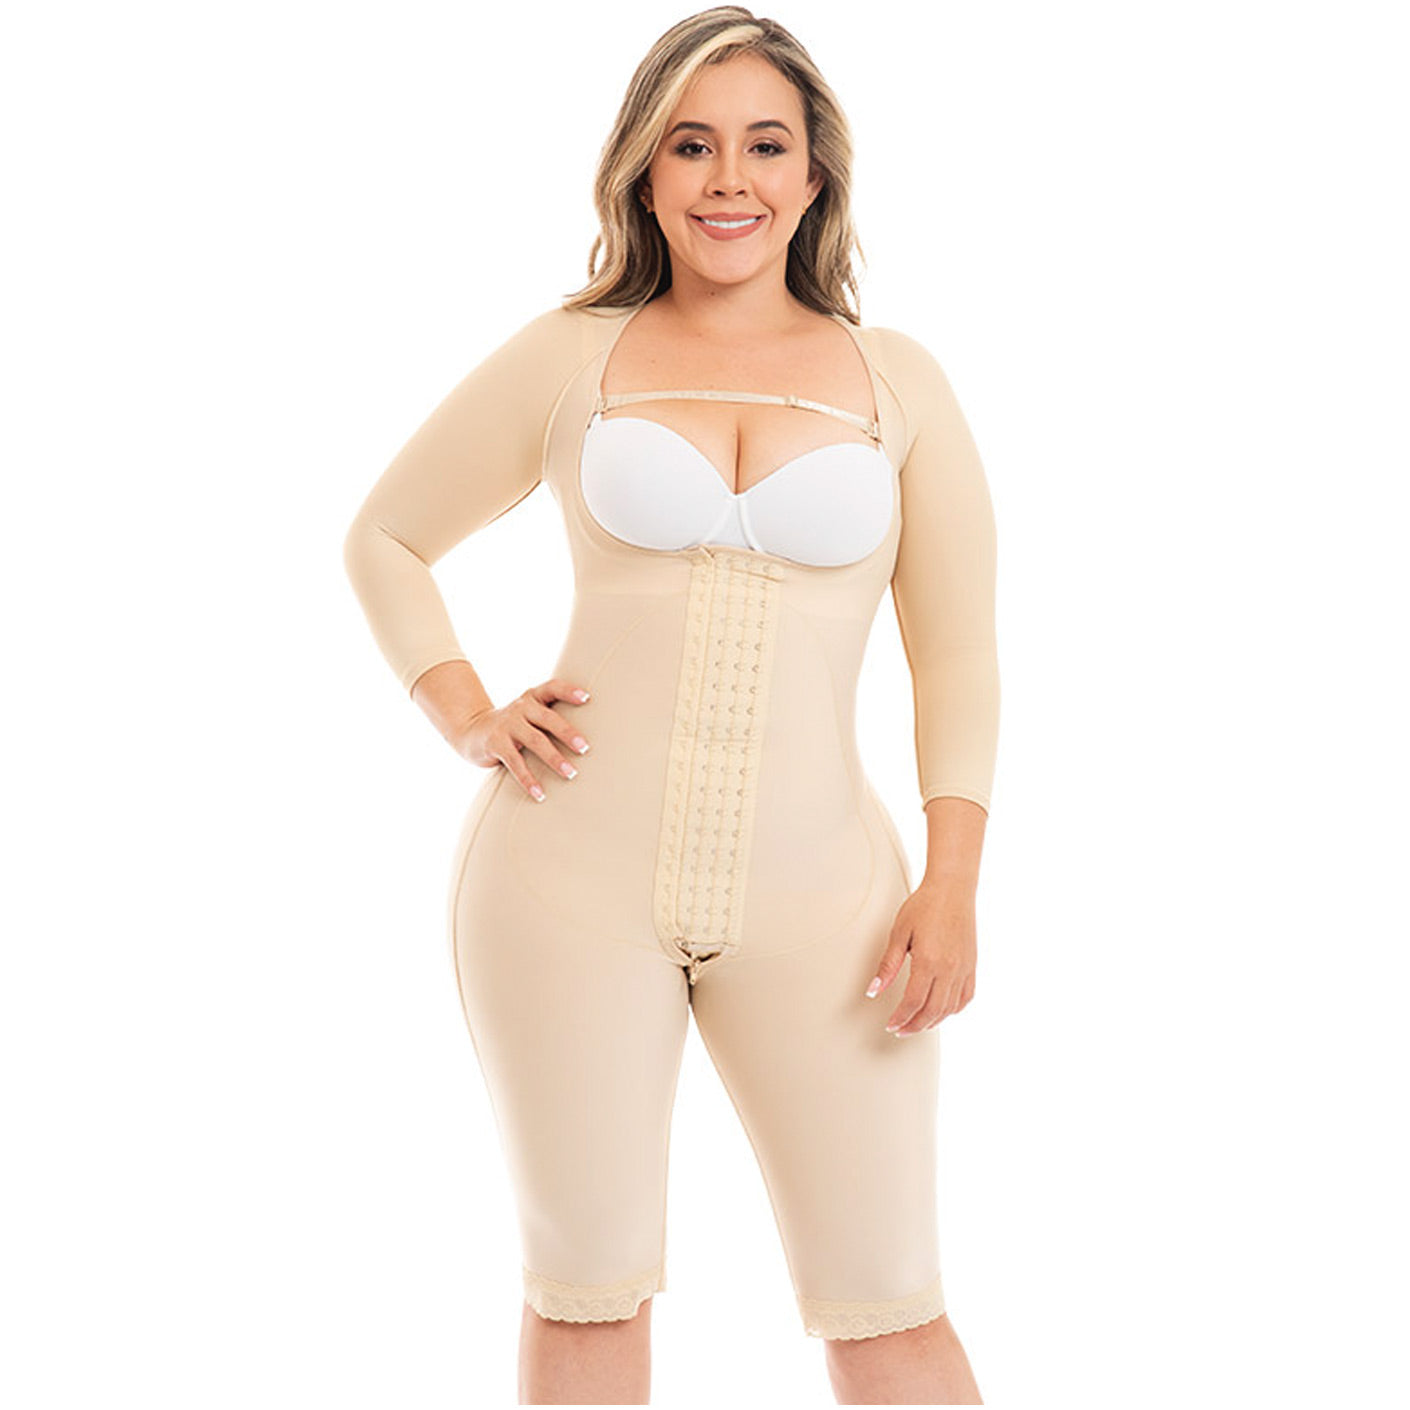 Fajas MyD 0065 Womens Colombian Girdle Postquirurgicas Post partum